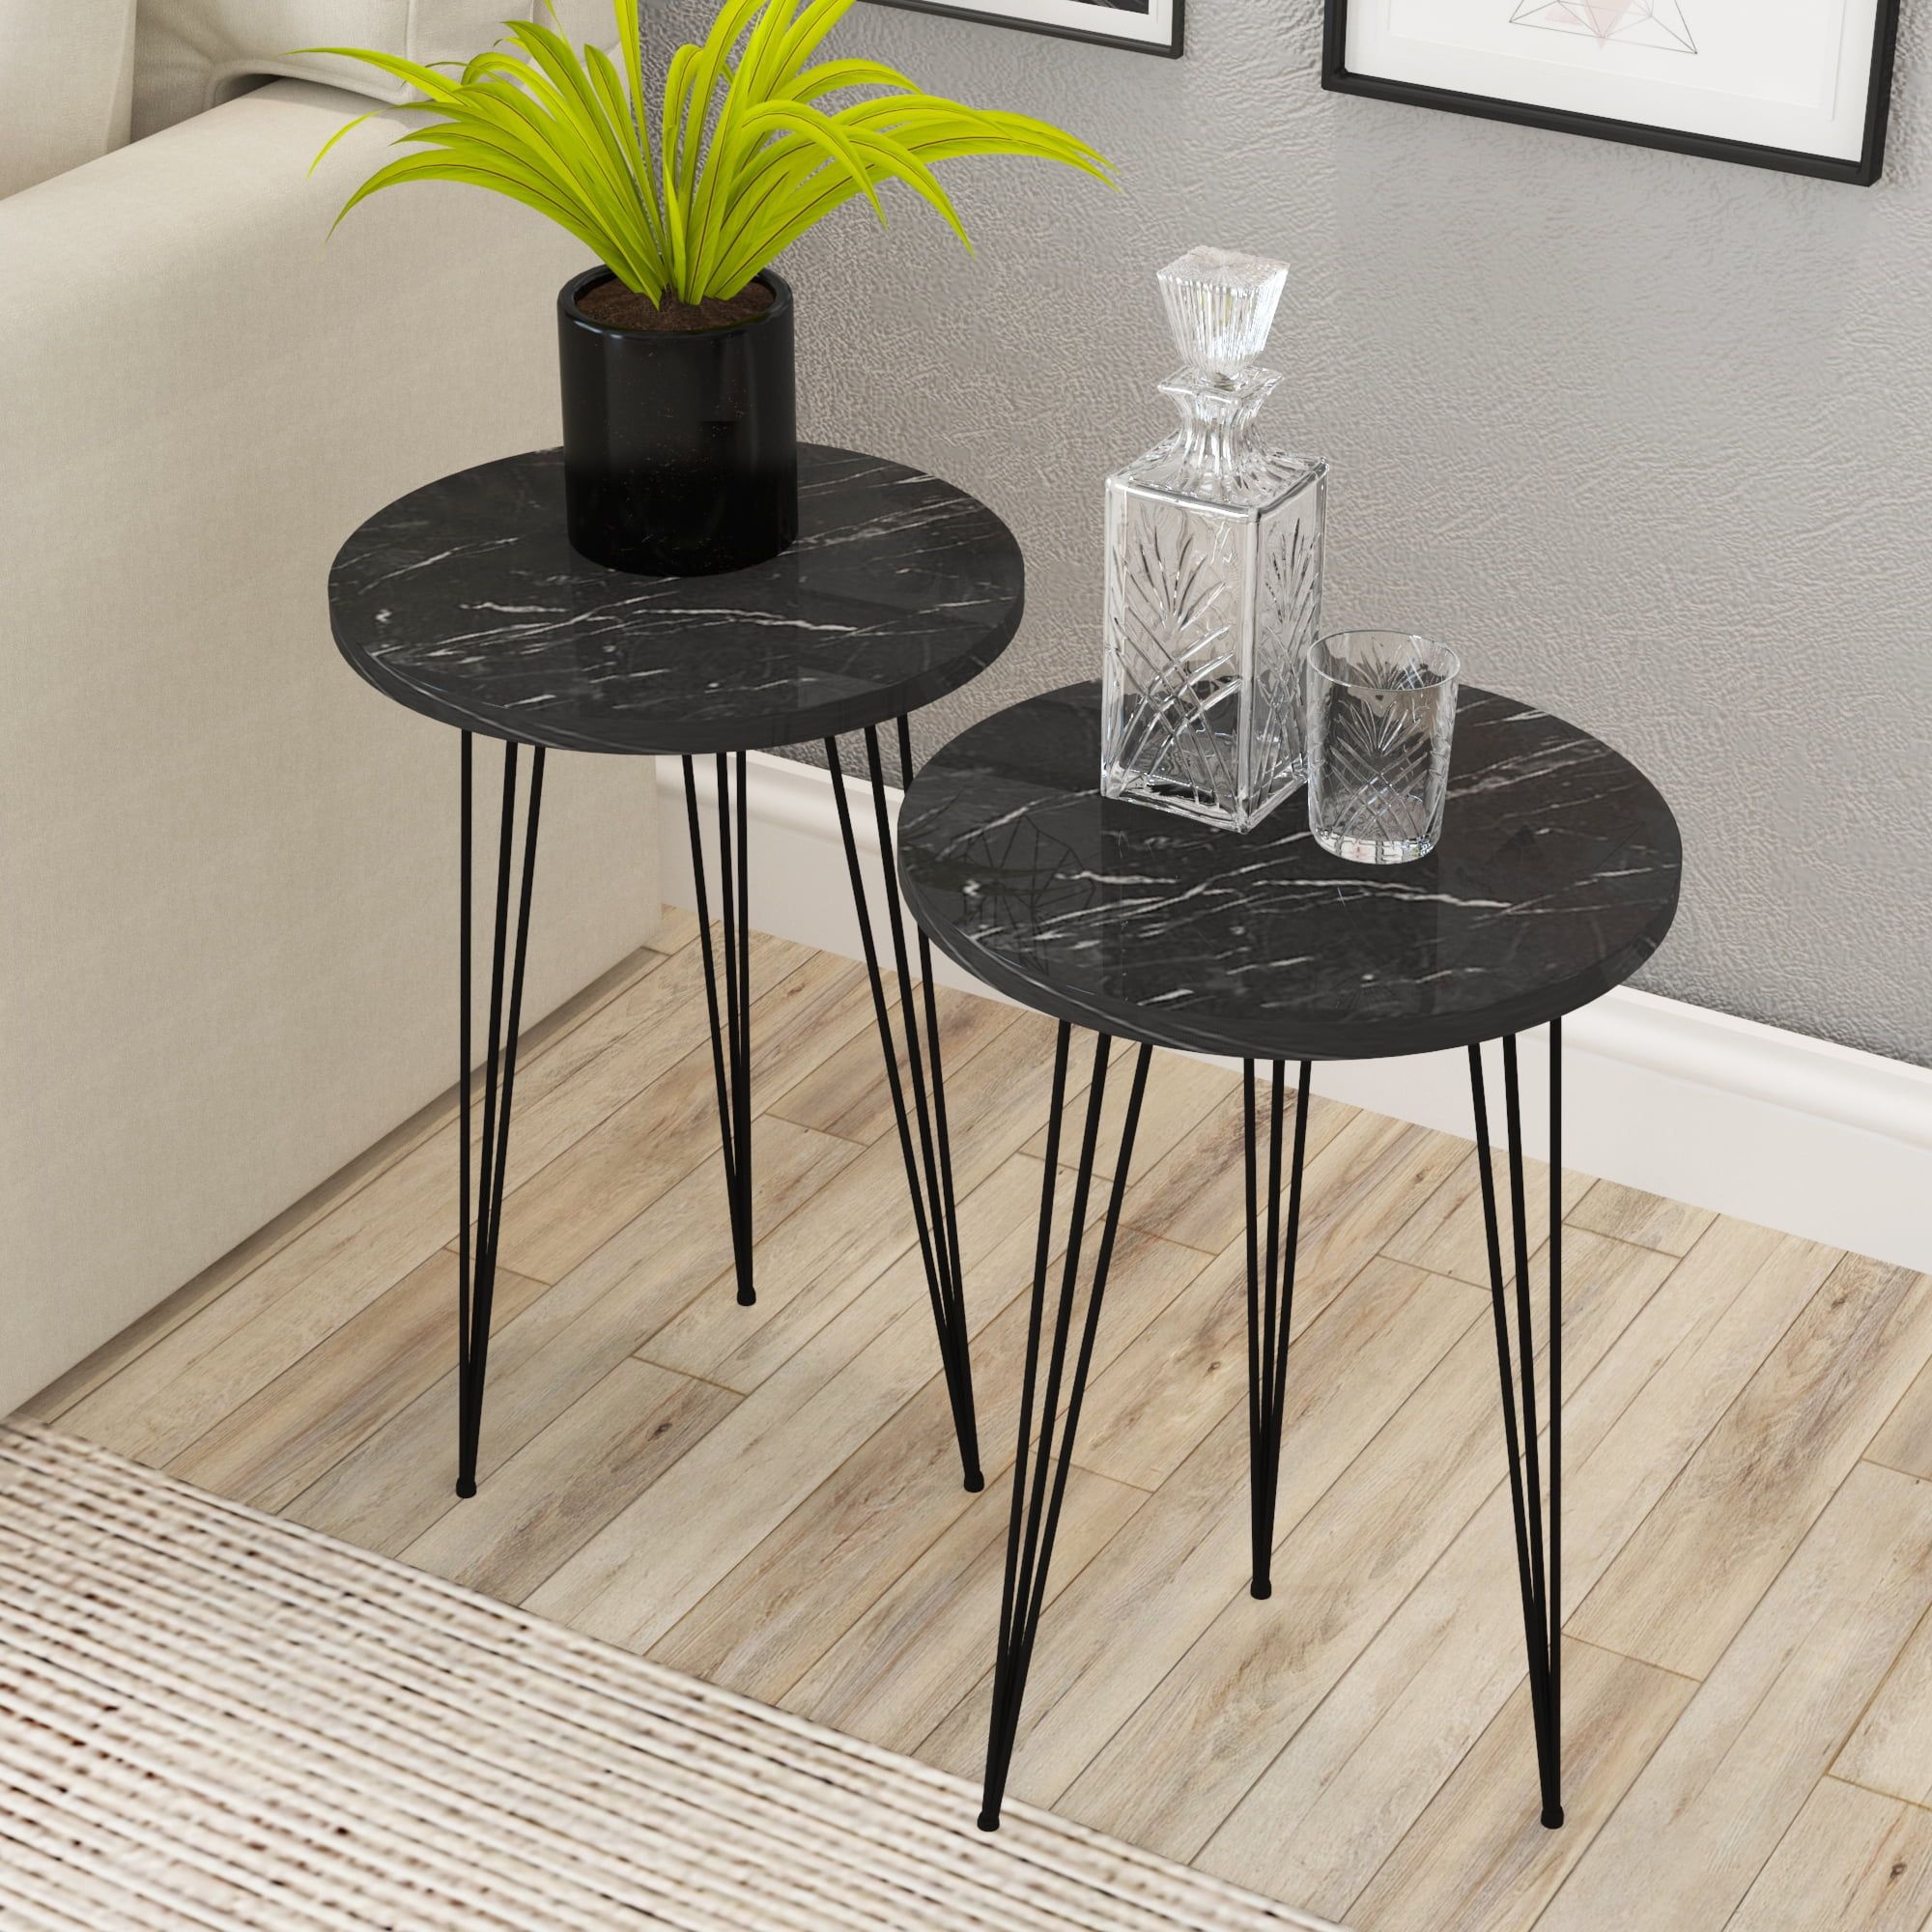 Pak Home Set Of 2 End Table – Round Wood Sofa Side Tables For Small Spaces,  Nightstand Bedside Table With Metal Legs For Bedroom, Living Room, Office,  Balcony (black High Gloss) – Walmart With Metal Side Tables For Living Spaces (View 5 of 15)